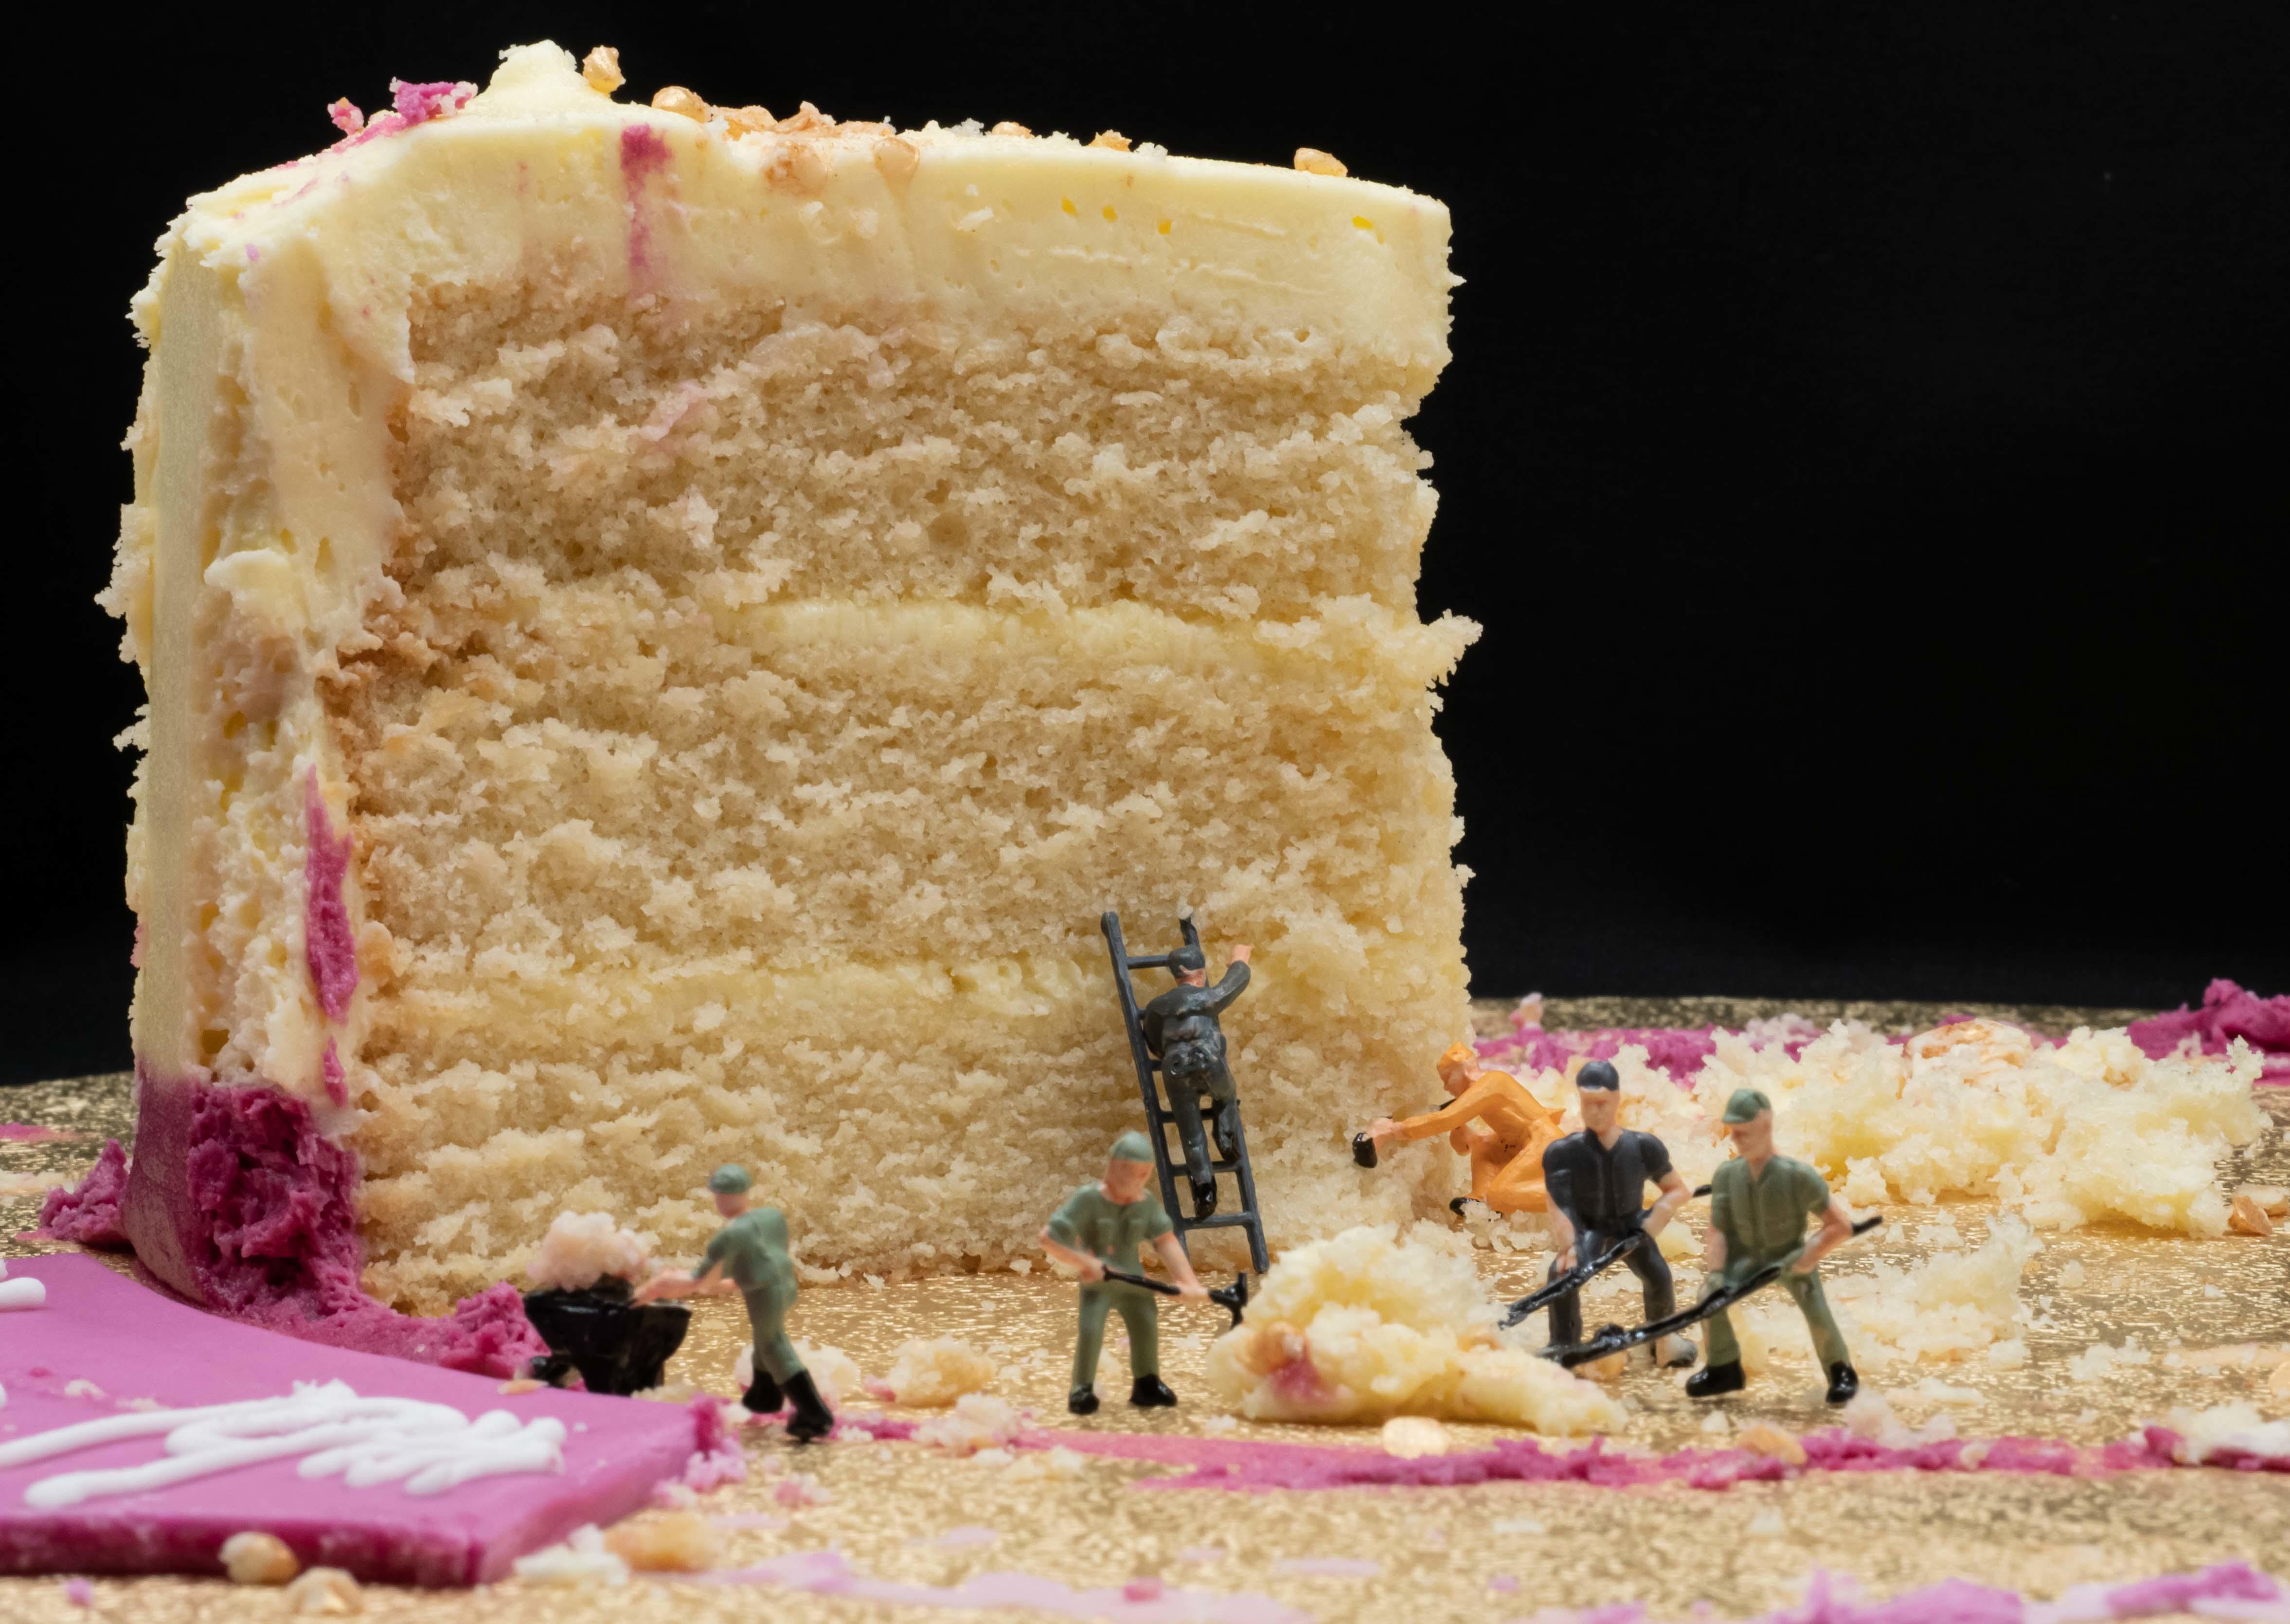 Dismantling The Last Slice uses miniature figurines and a real birthday cake to produce this fun print.